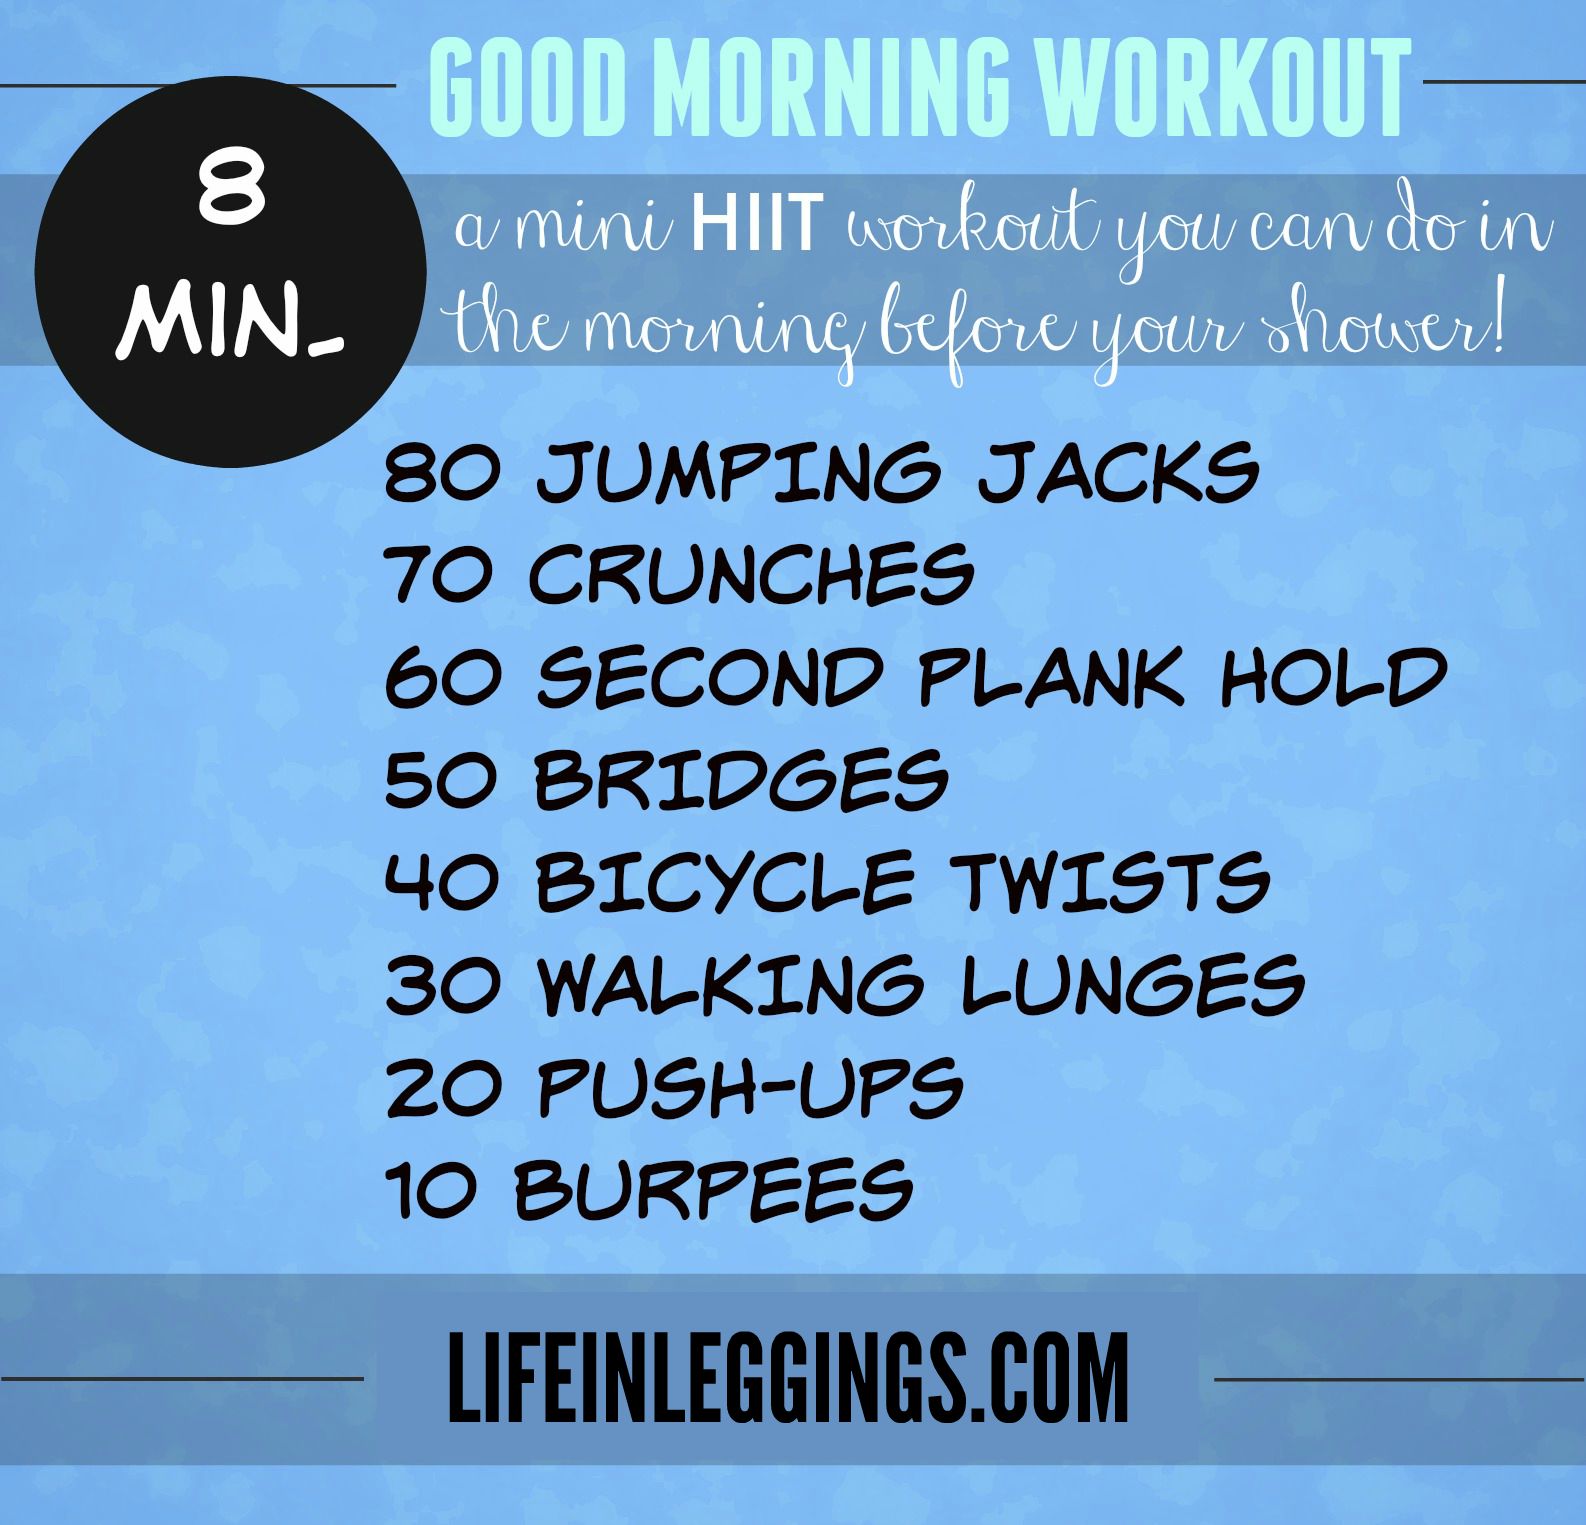 Mini-HIIT-workout-before-your-shower